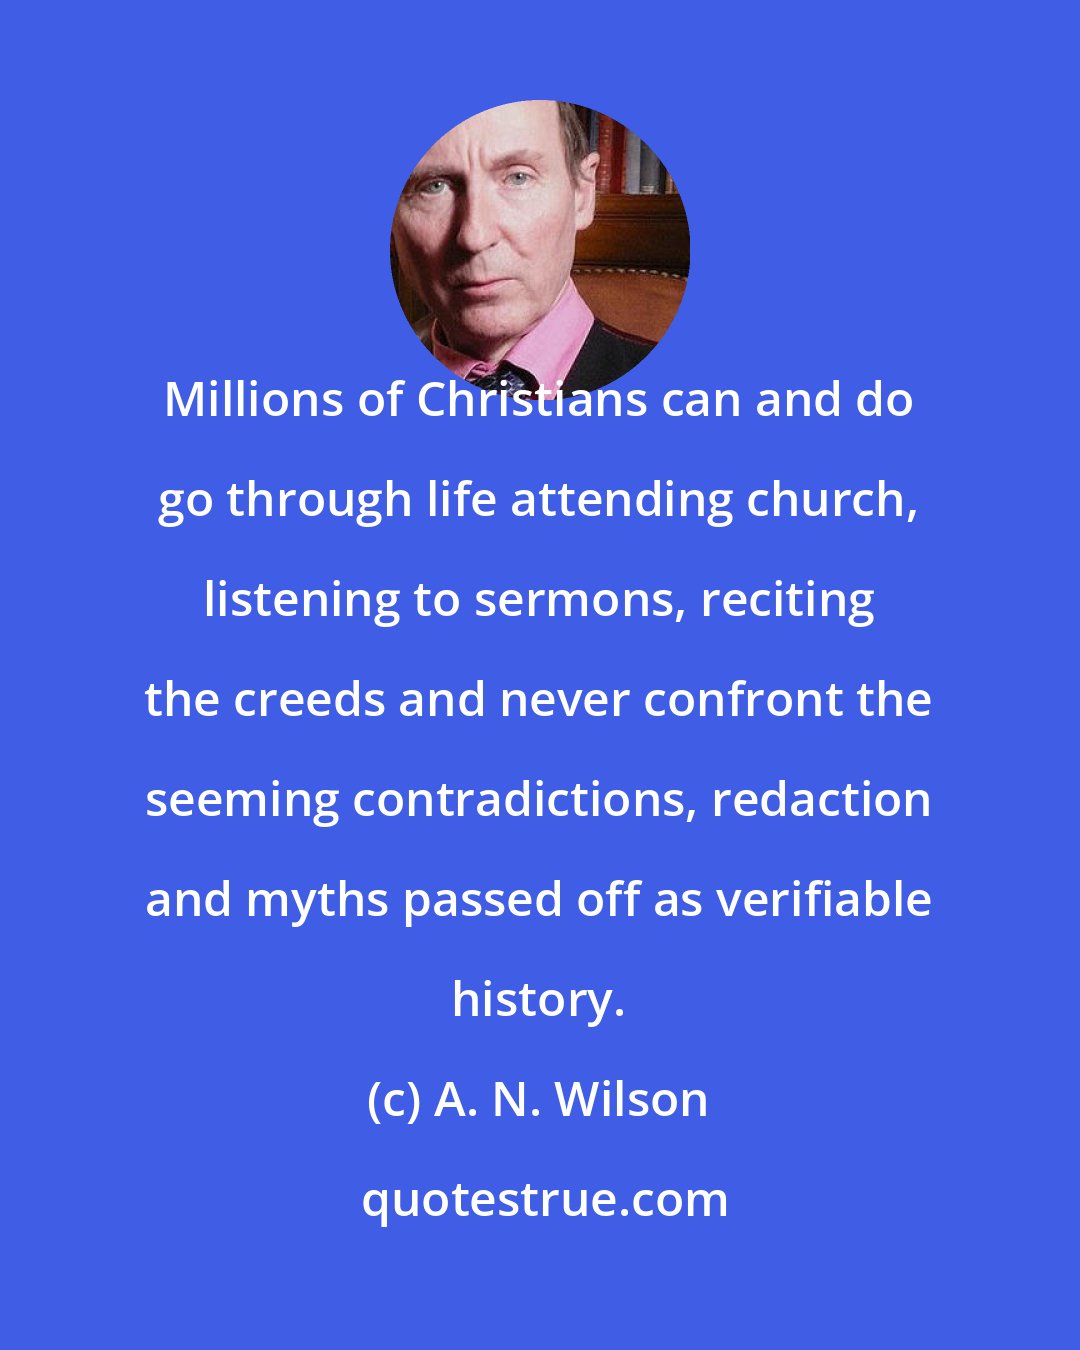 A. N. Wilson: Millions of Christians can and do go through life attending church, listening to sermons, reciting the creeds and never confront the seeming contradictions, redaction and myths passed off as verifiable history.